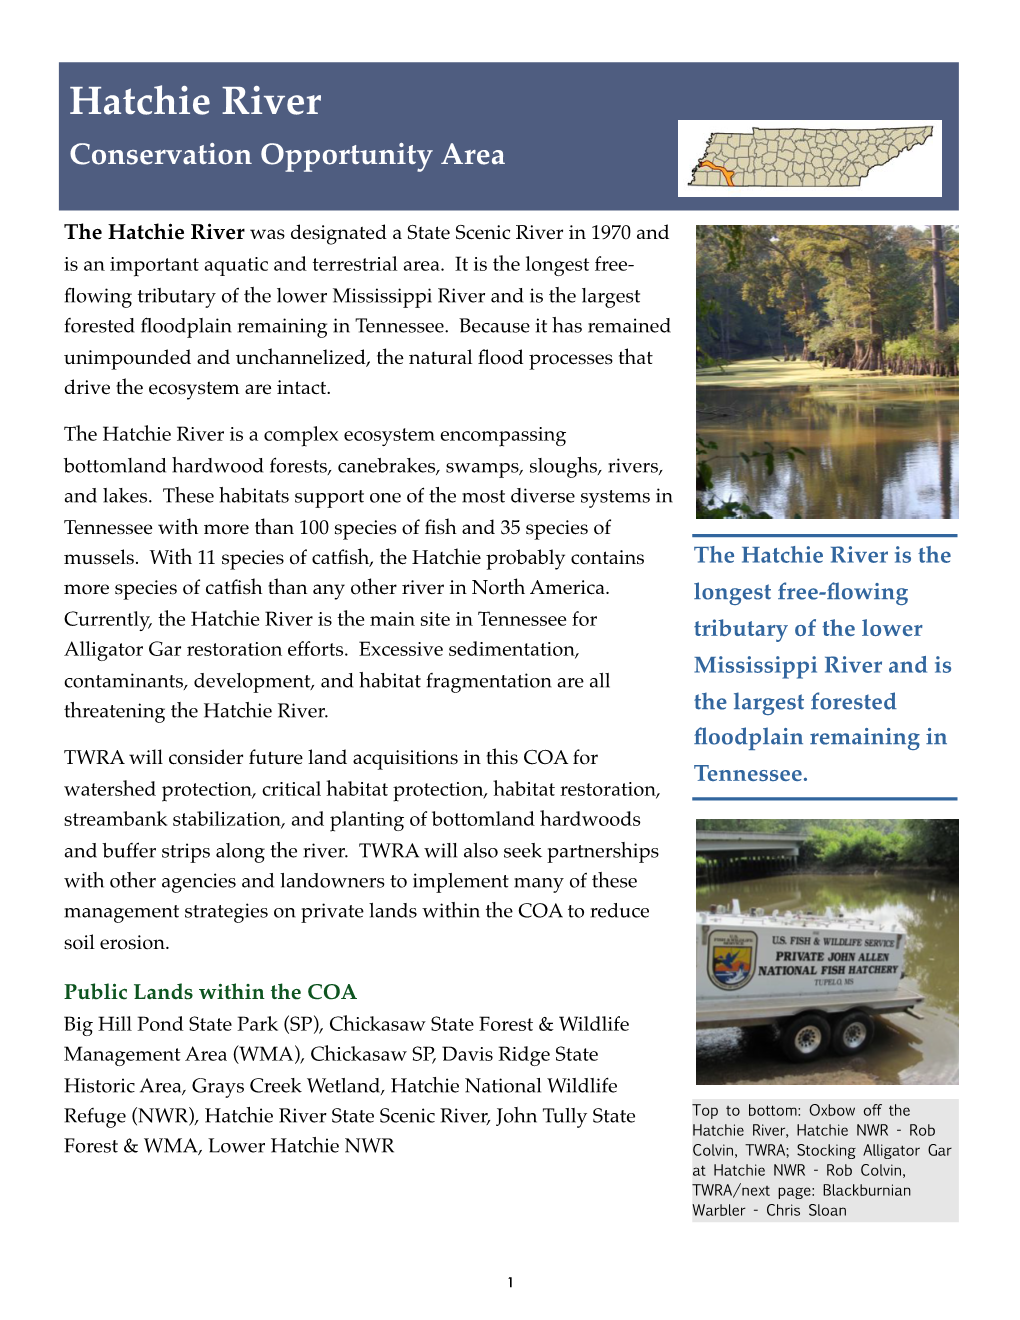 Hatchie River Conservation Opportunity Area